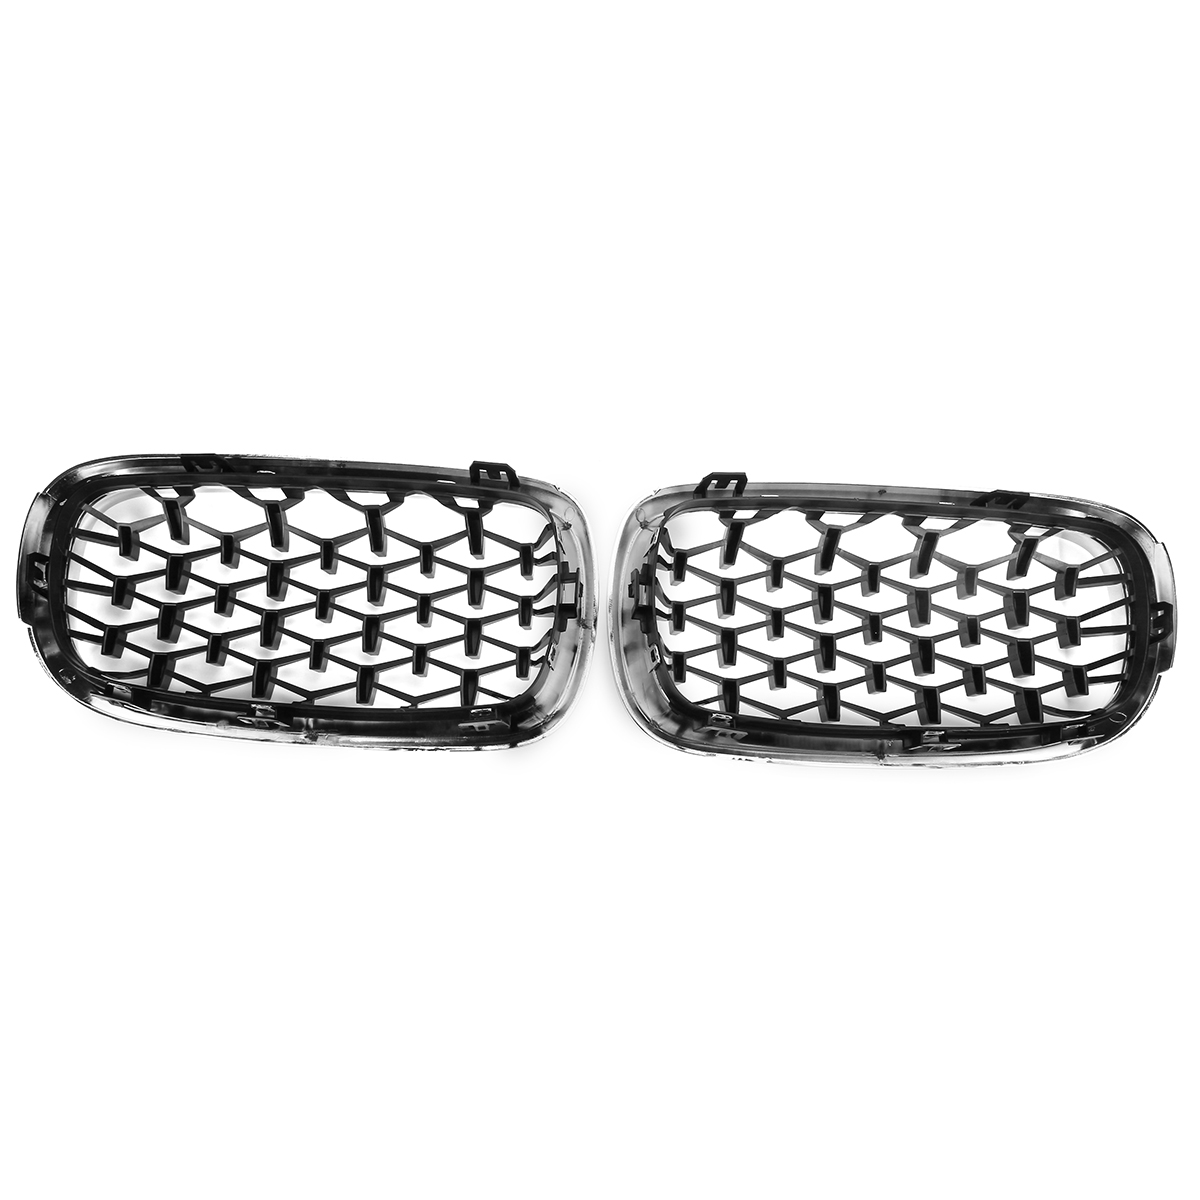 1Pair Chrome Front Kidney Grill Grille For BMW X5 F15 X6 F16 2014-2017 Left Right